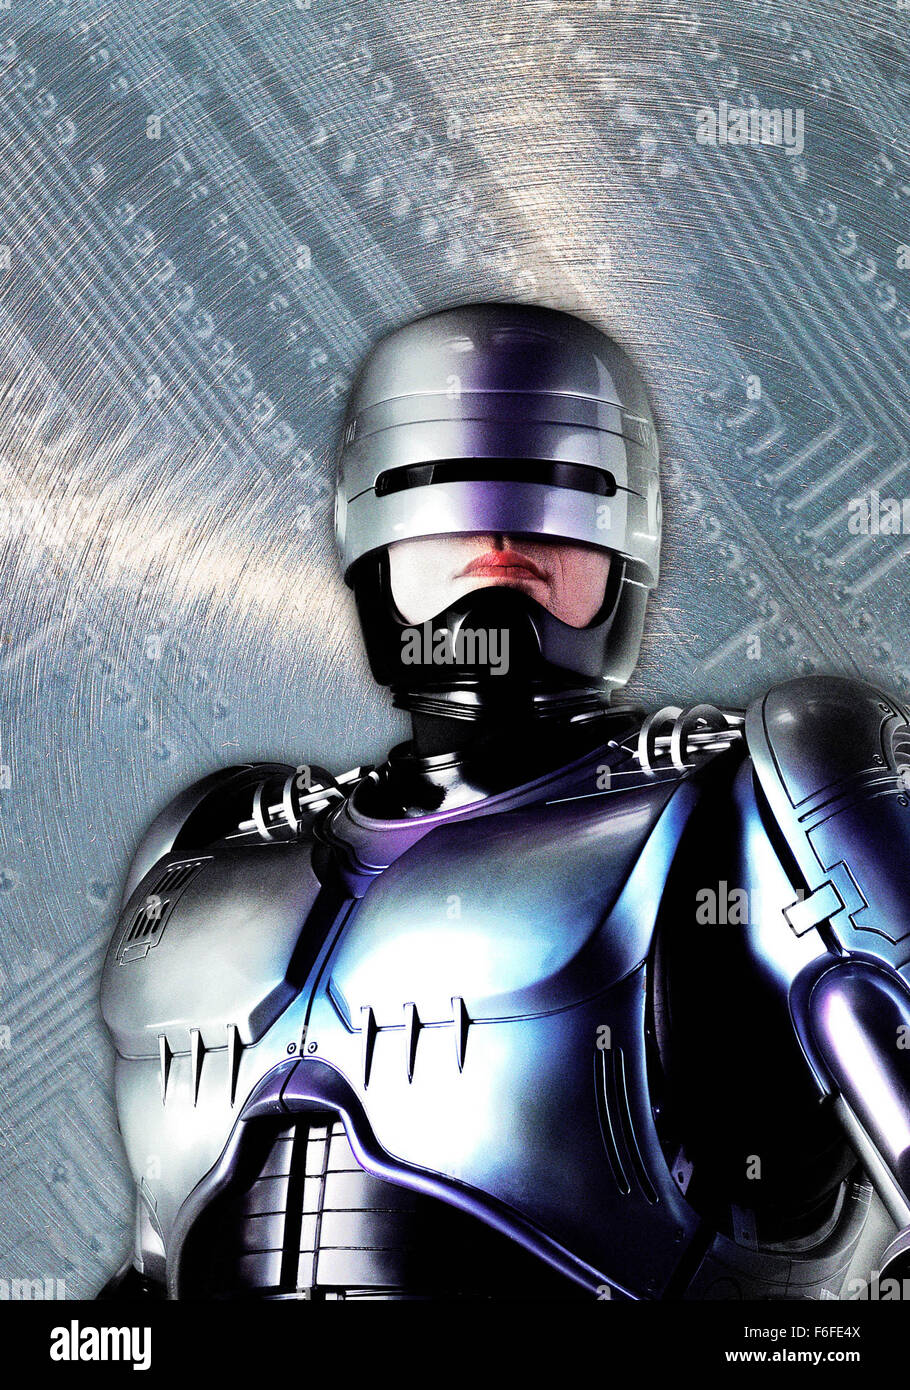 Jul 17, 1987; Dallas, TX, USA; Pictured:  A illustration from 'RoboCop,' a 1987 film directed by PAUL VERHOEVEN and starring PETER WELLER as RoboCop and NANCY ALLEN as Officer Anne Lewis. Stock Photo